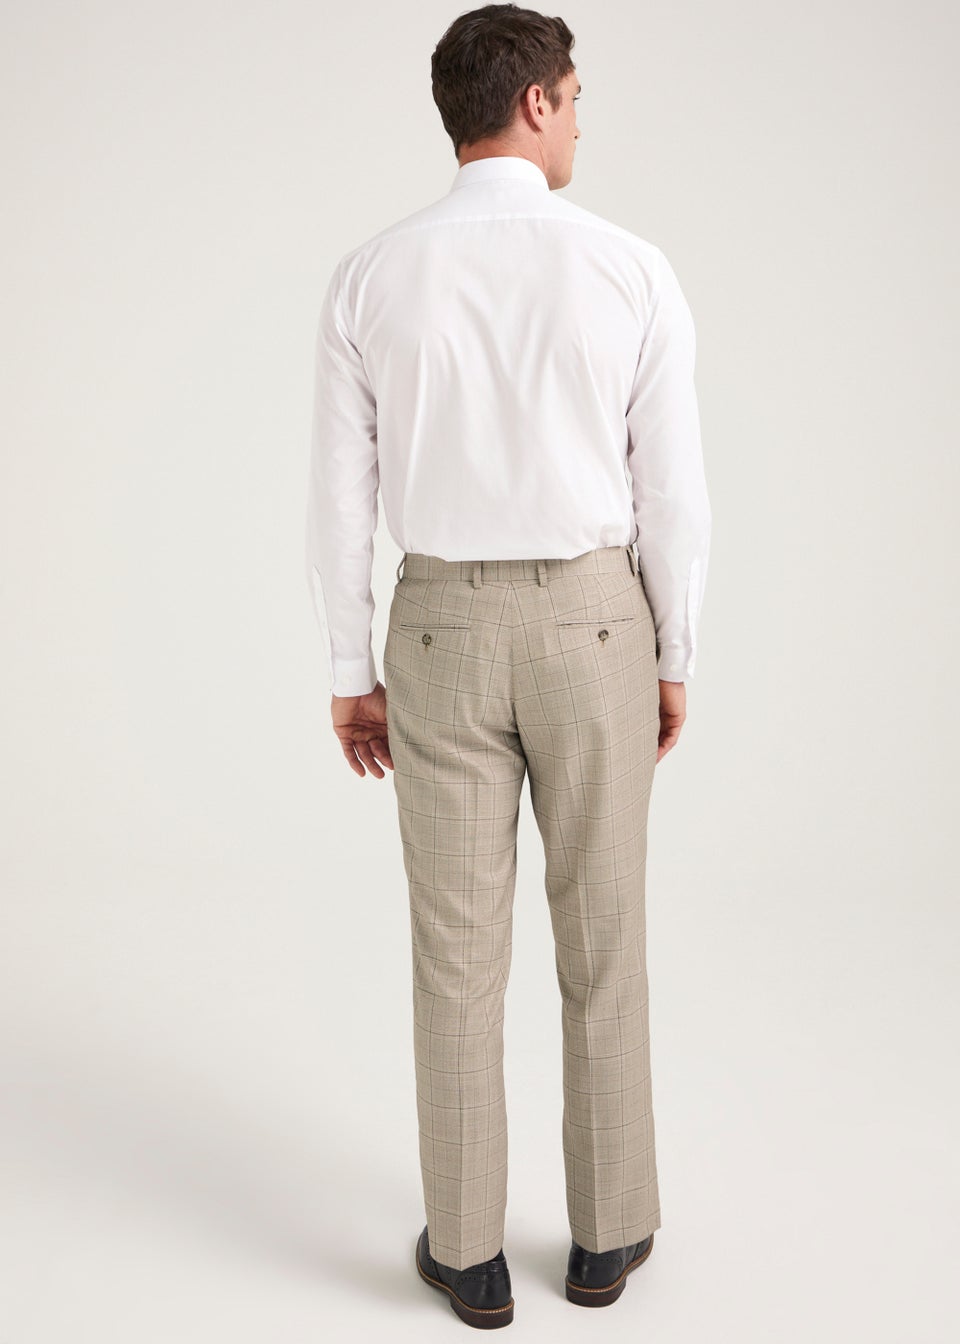 Taylor & Wright Hoffman Brown Tailored Fit Suit Trousers